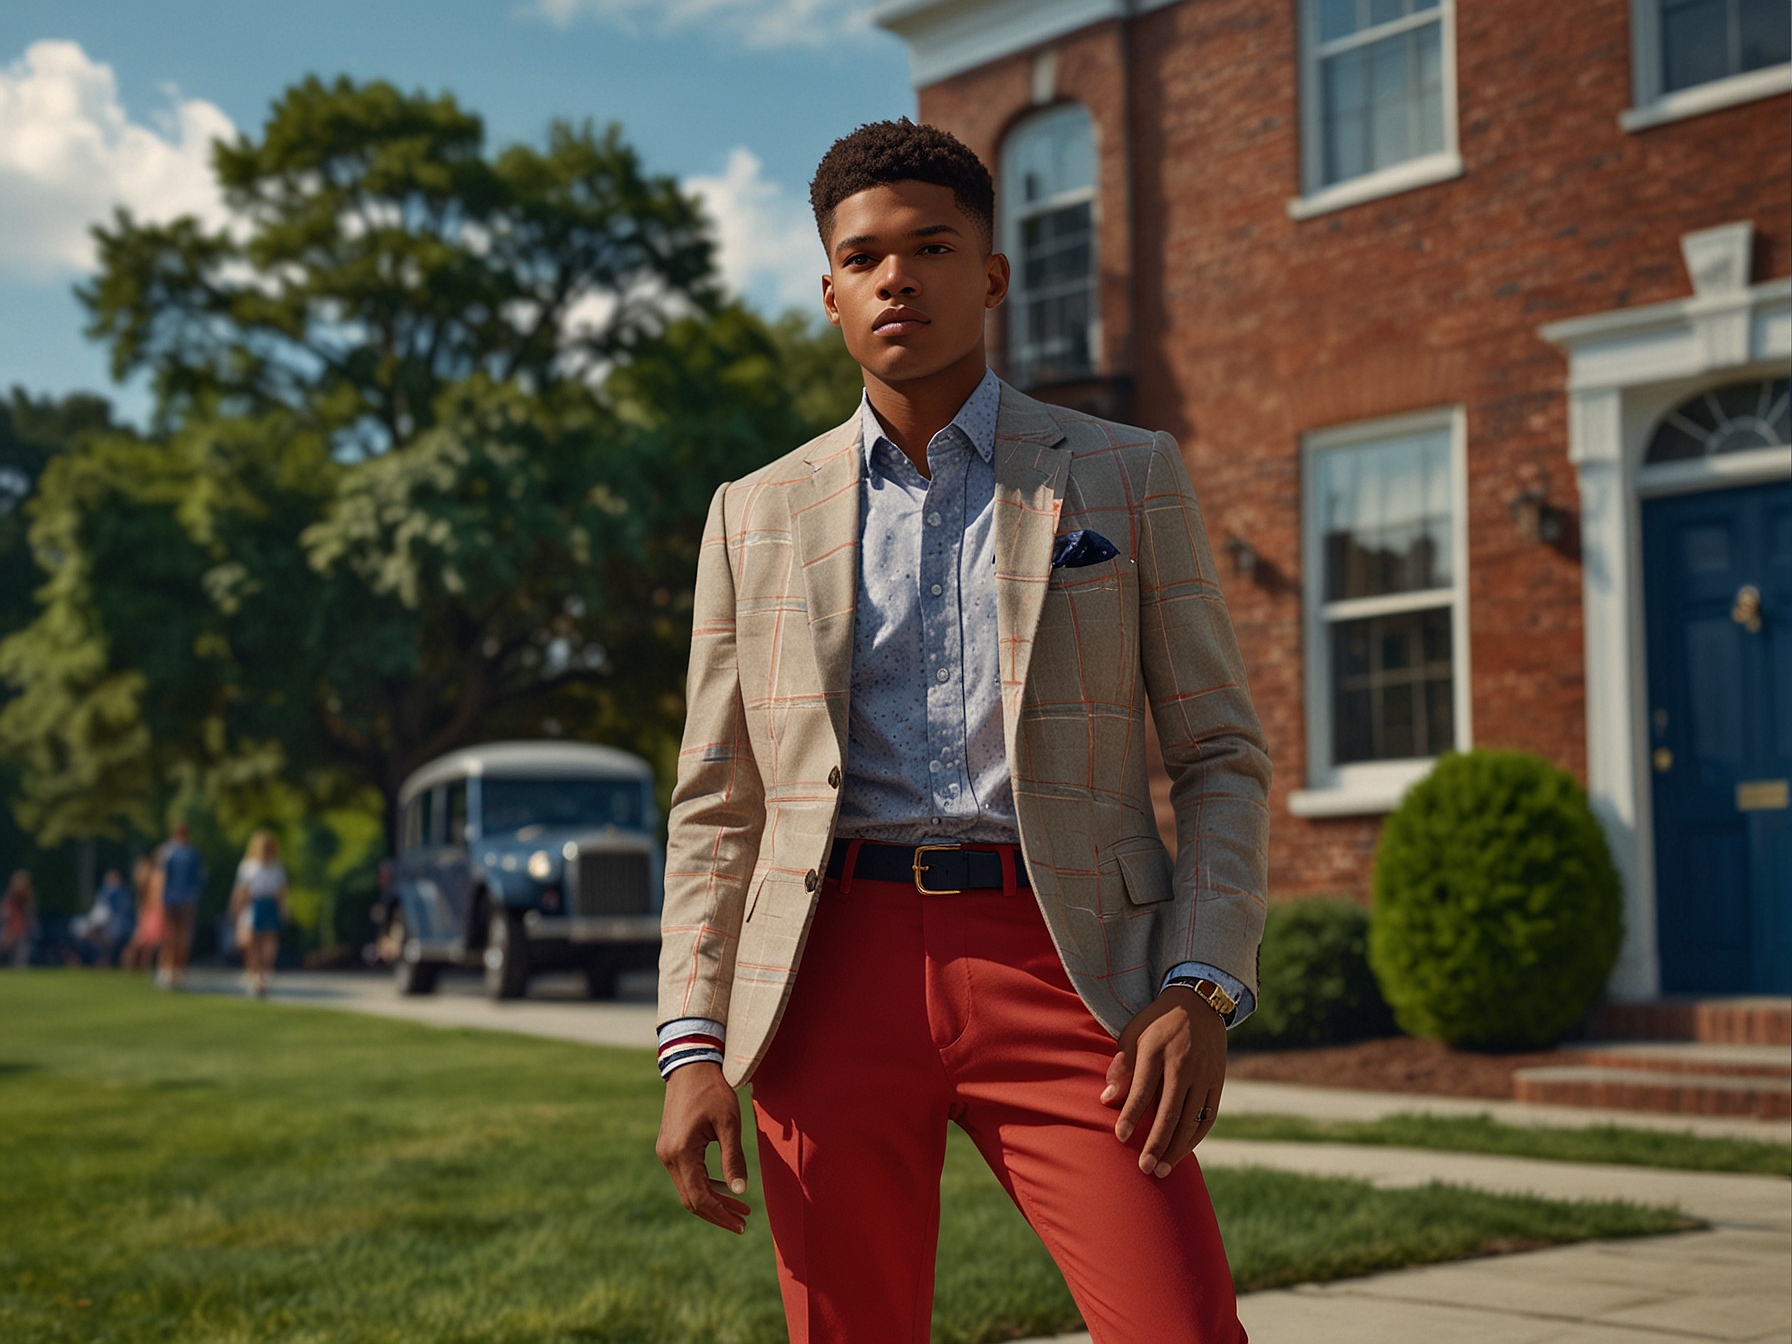 In a Tommy Hilfiger campaign, Michael Rainey Jr. models preppy outfits against a tranquil Connecticut backdrop. This image underscores his evolving fashion sense and the influence of New York's street style.